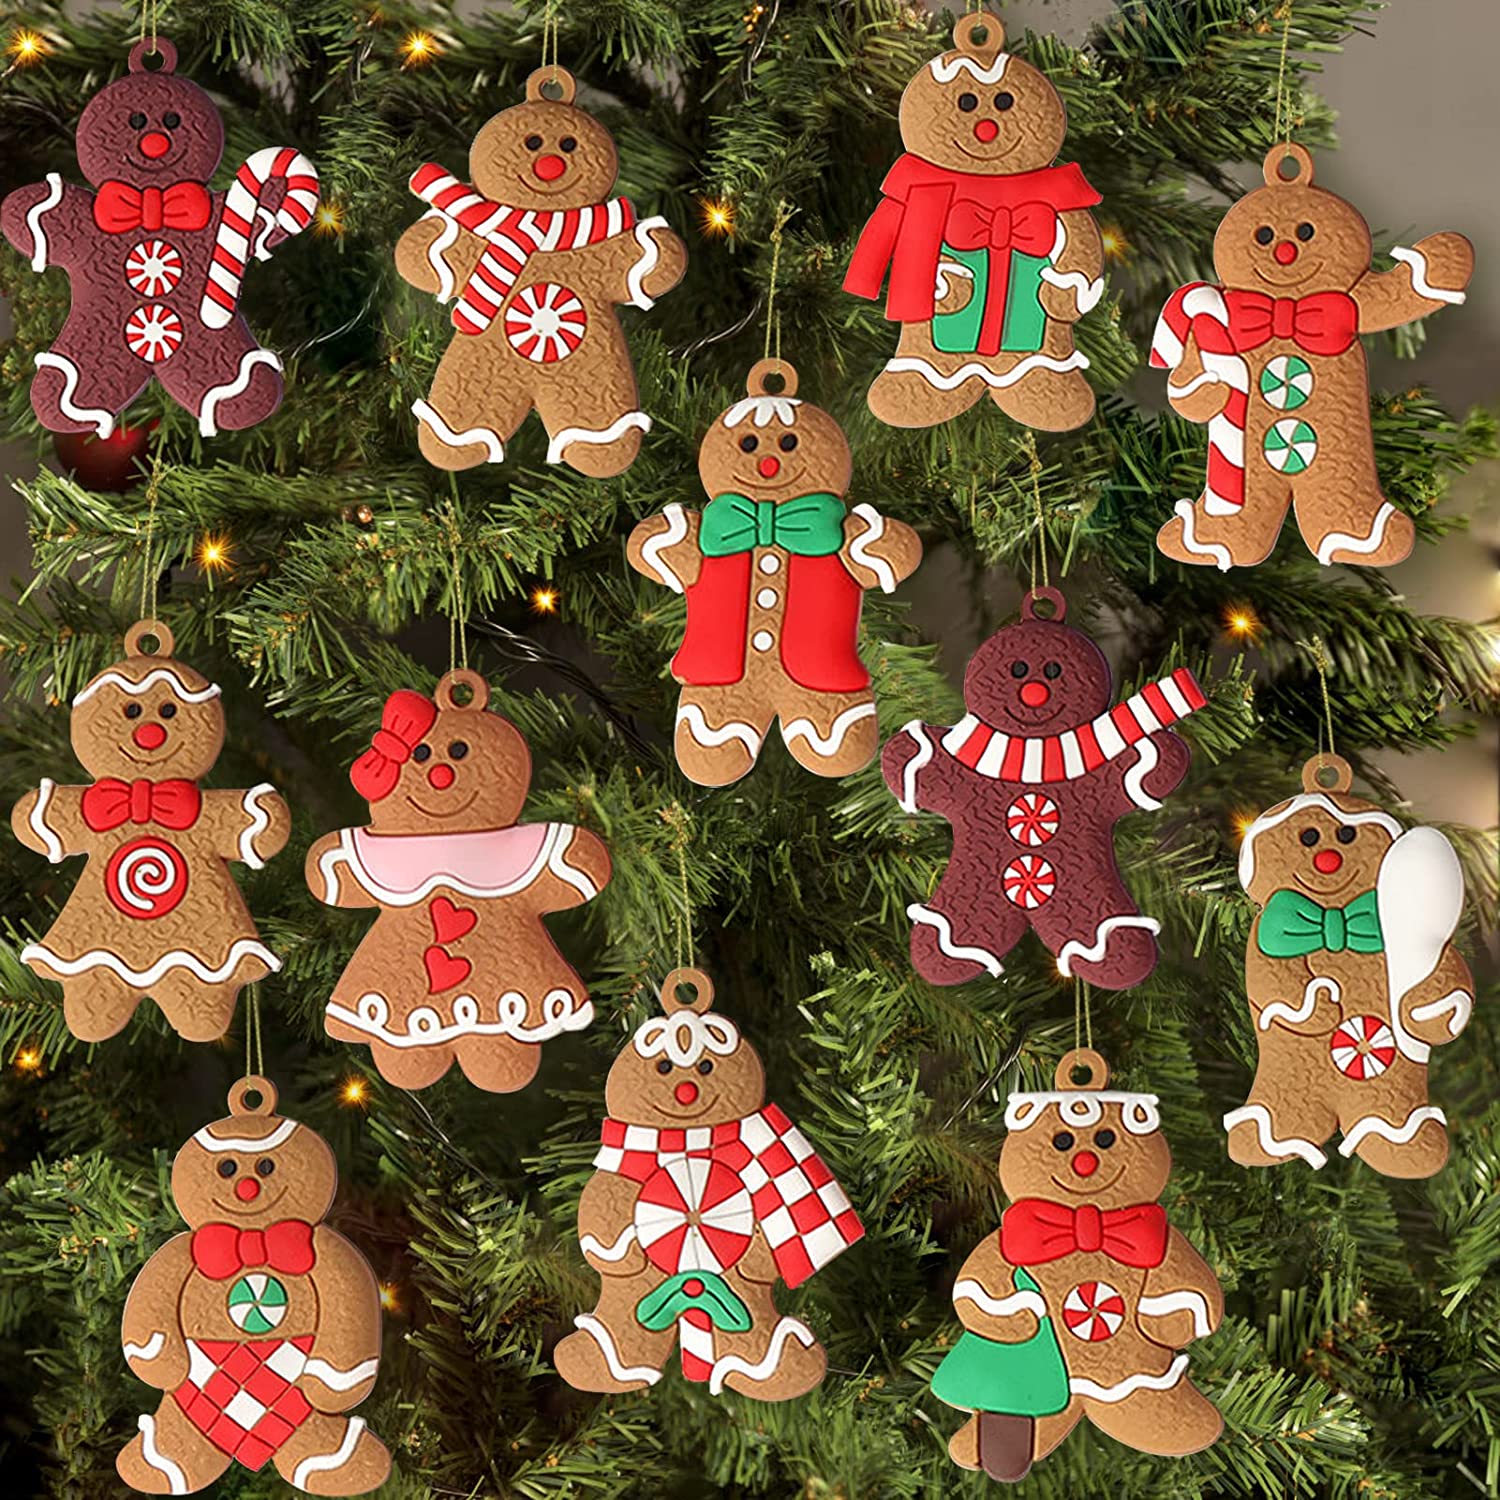 

12pcs Gingerbread Man Ornaments For Christmas Tree Assorted Plastic Gingerbread Figurines Ornaments For Christmas Tree Hanging Decorations 3